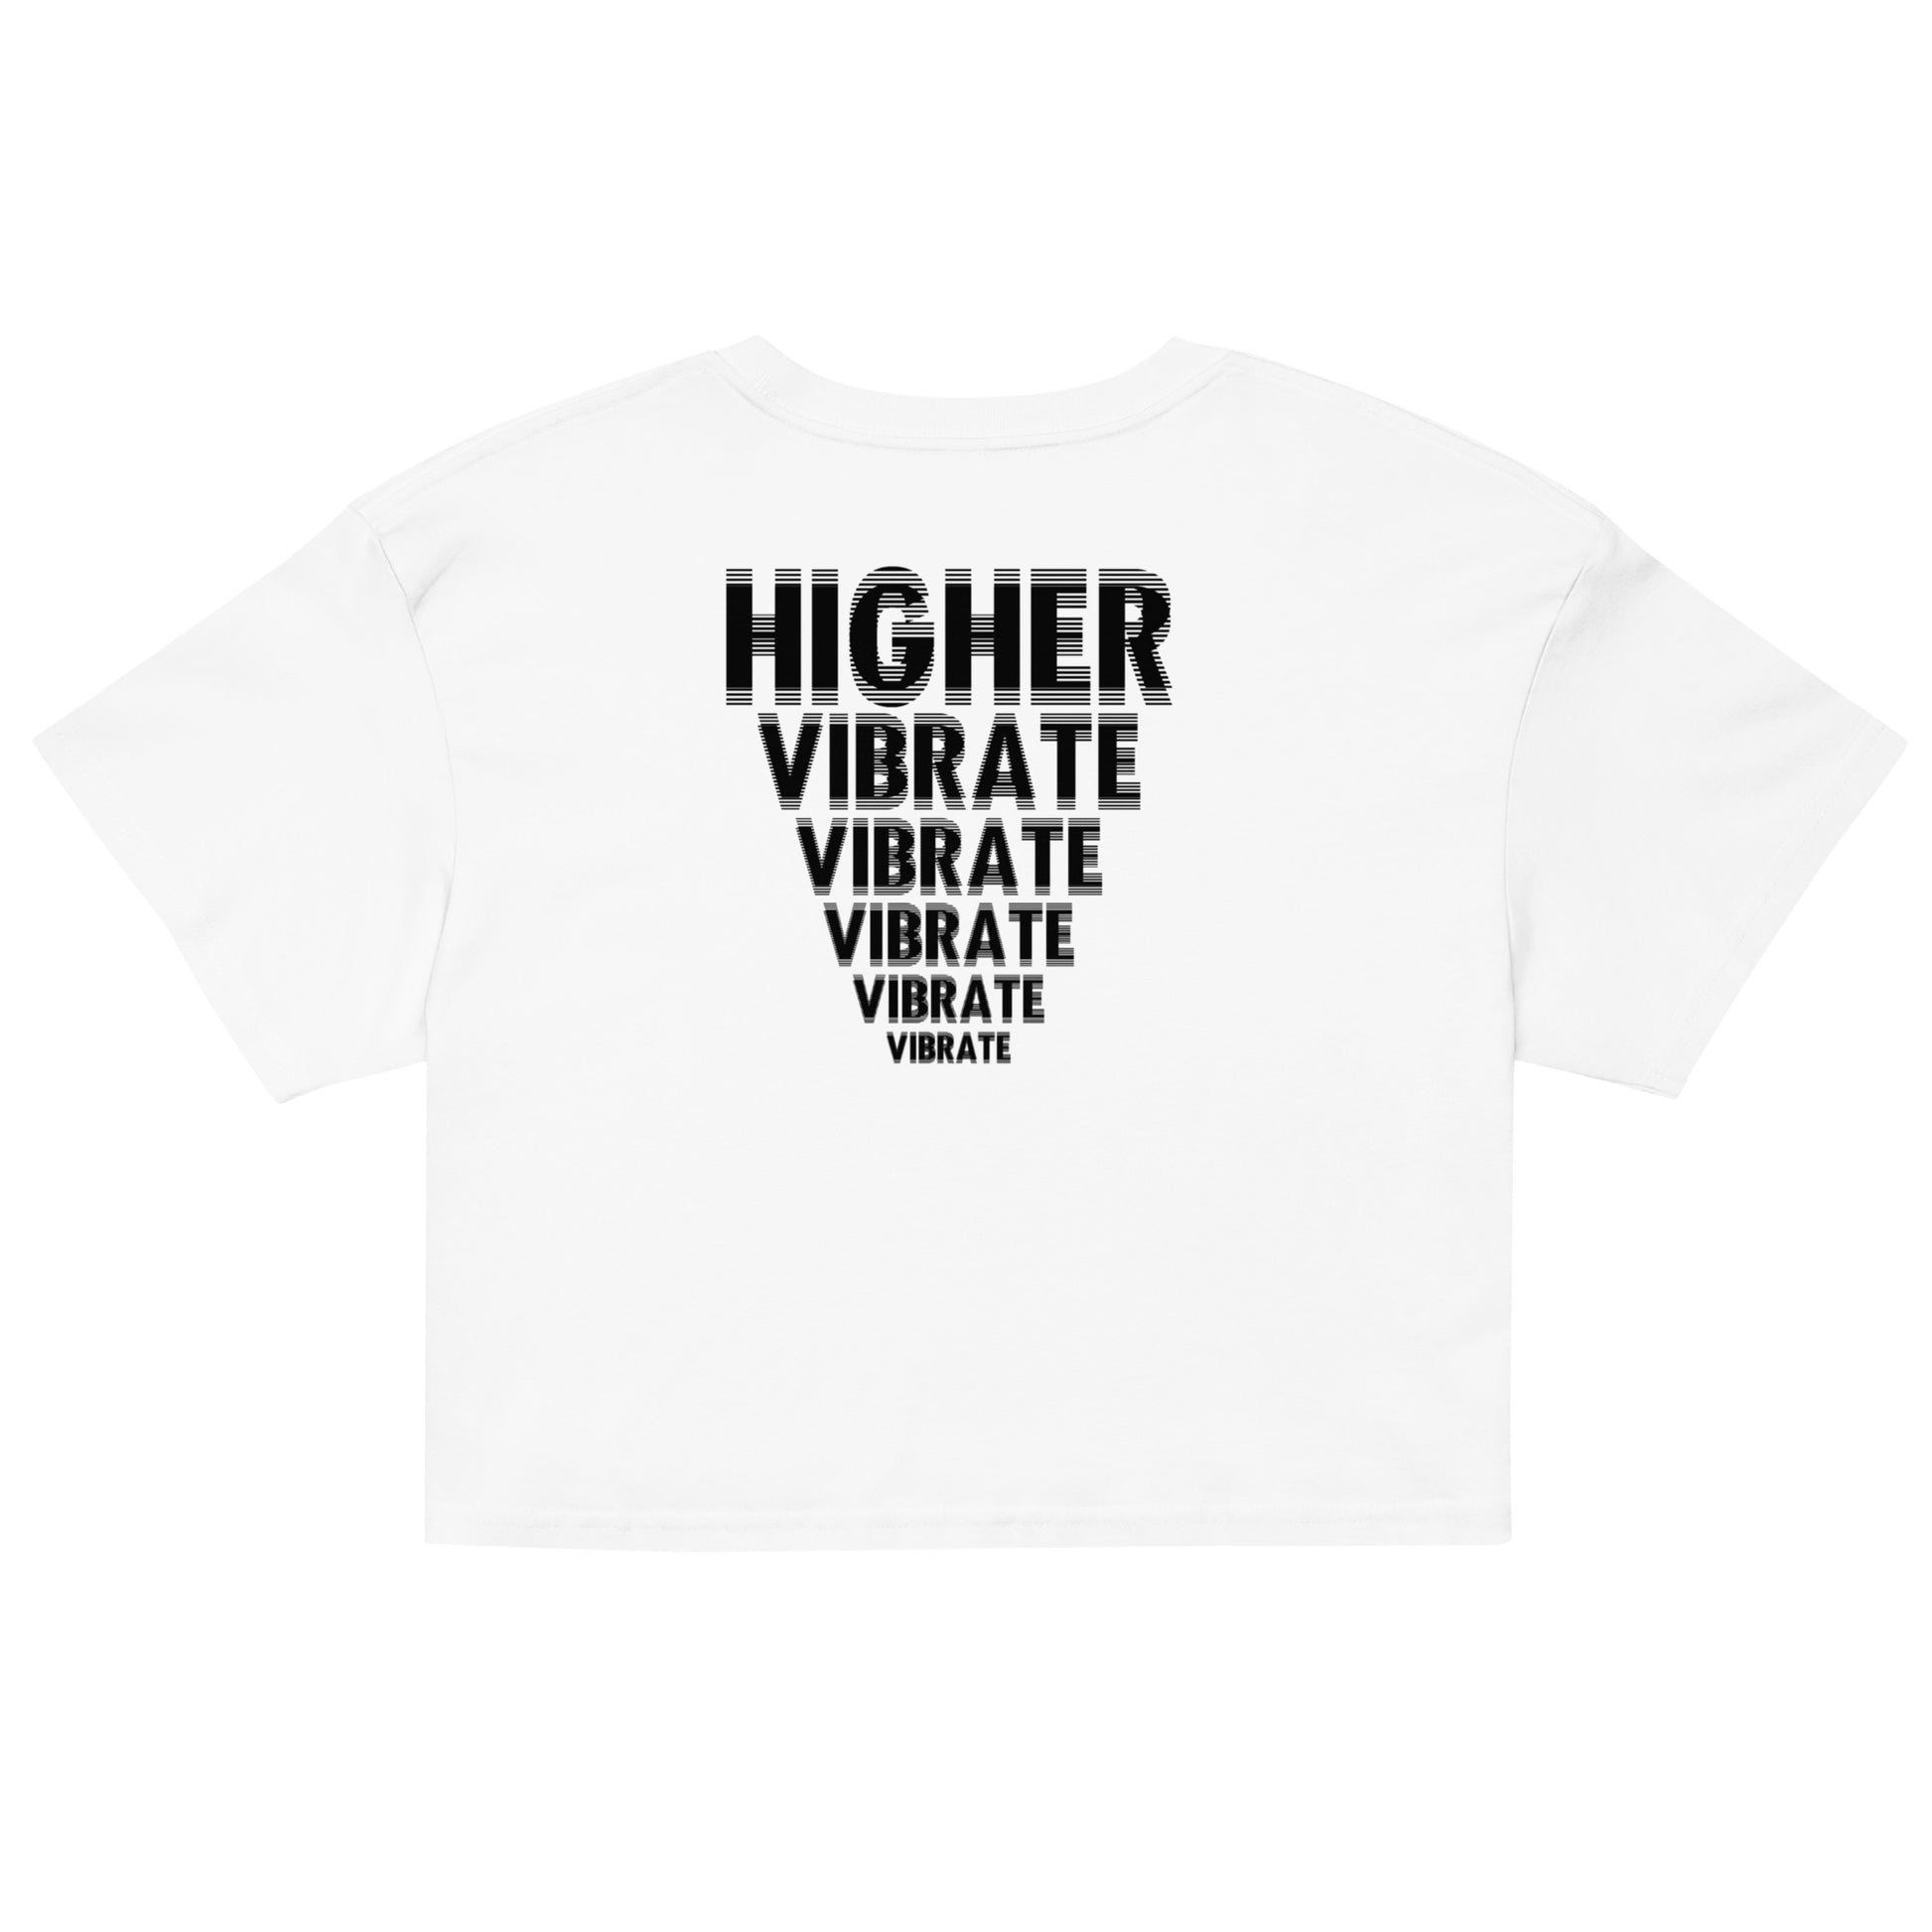 Vibrate Higher crop top - PROTECT YO ENERGY 